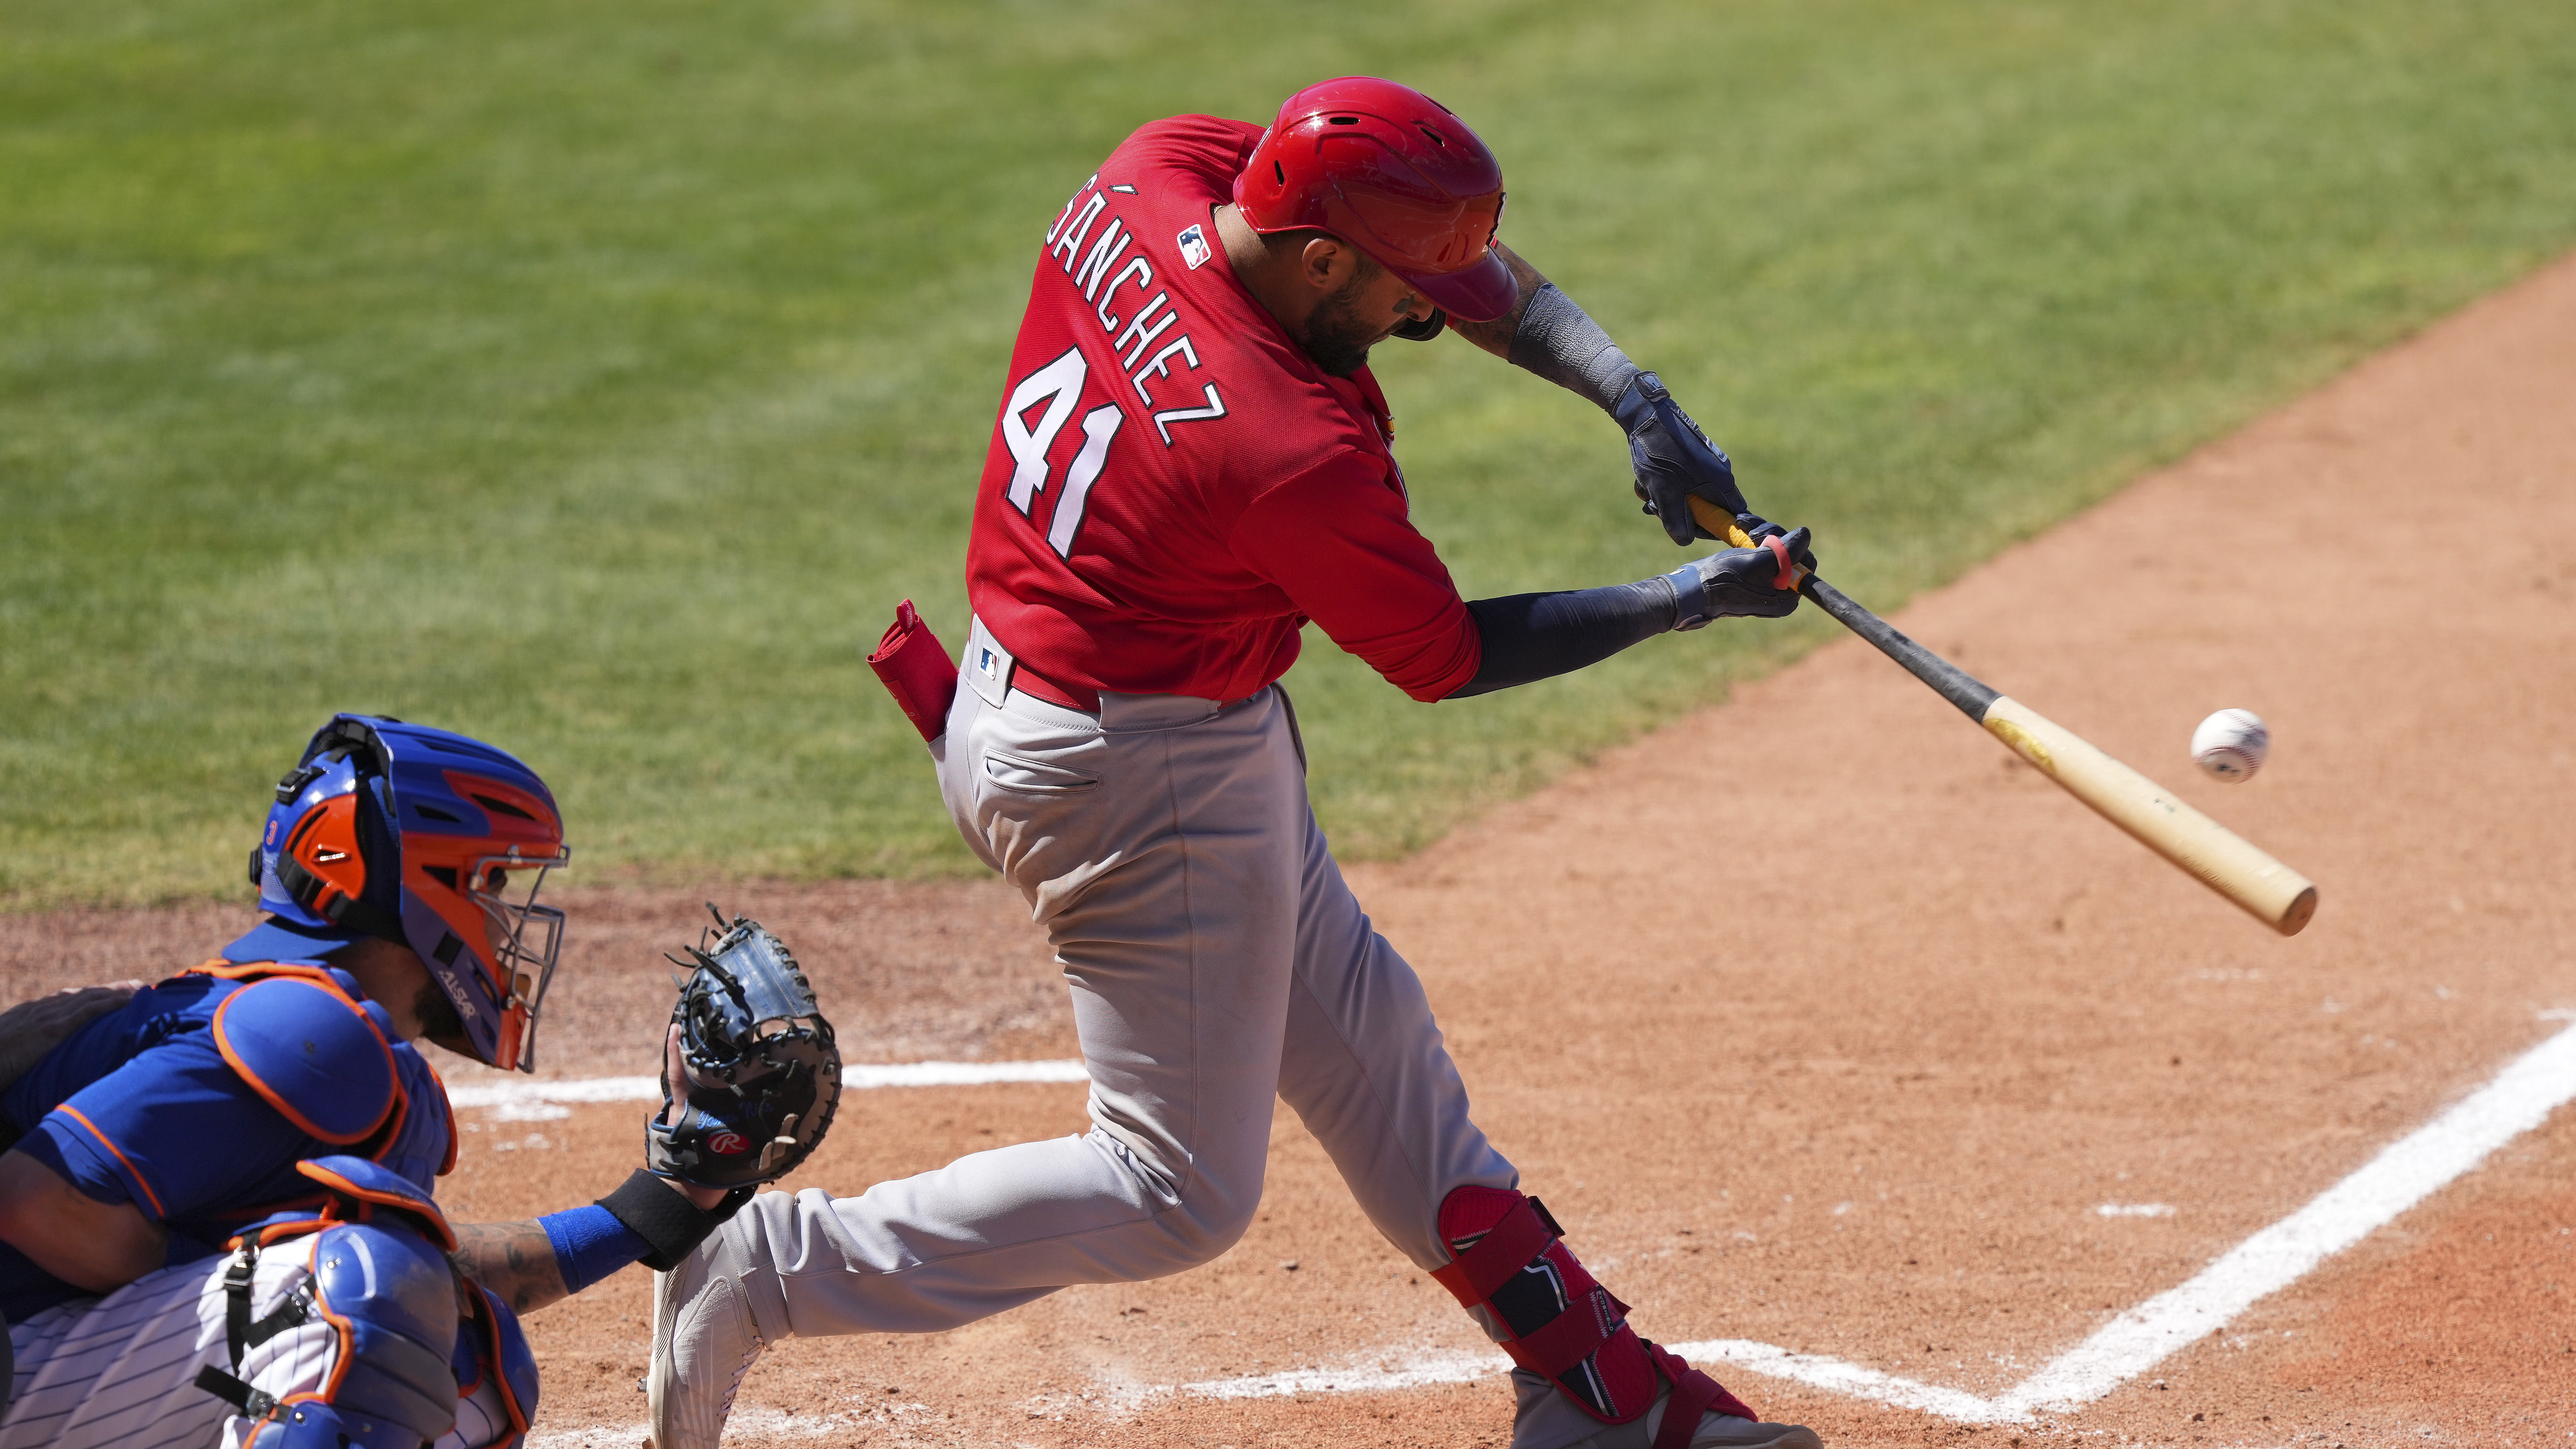 Ali Sanchez #41 of the St. Louis Cardinals hits a double in the seventh inning of the Spring Traini...